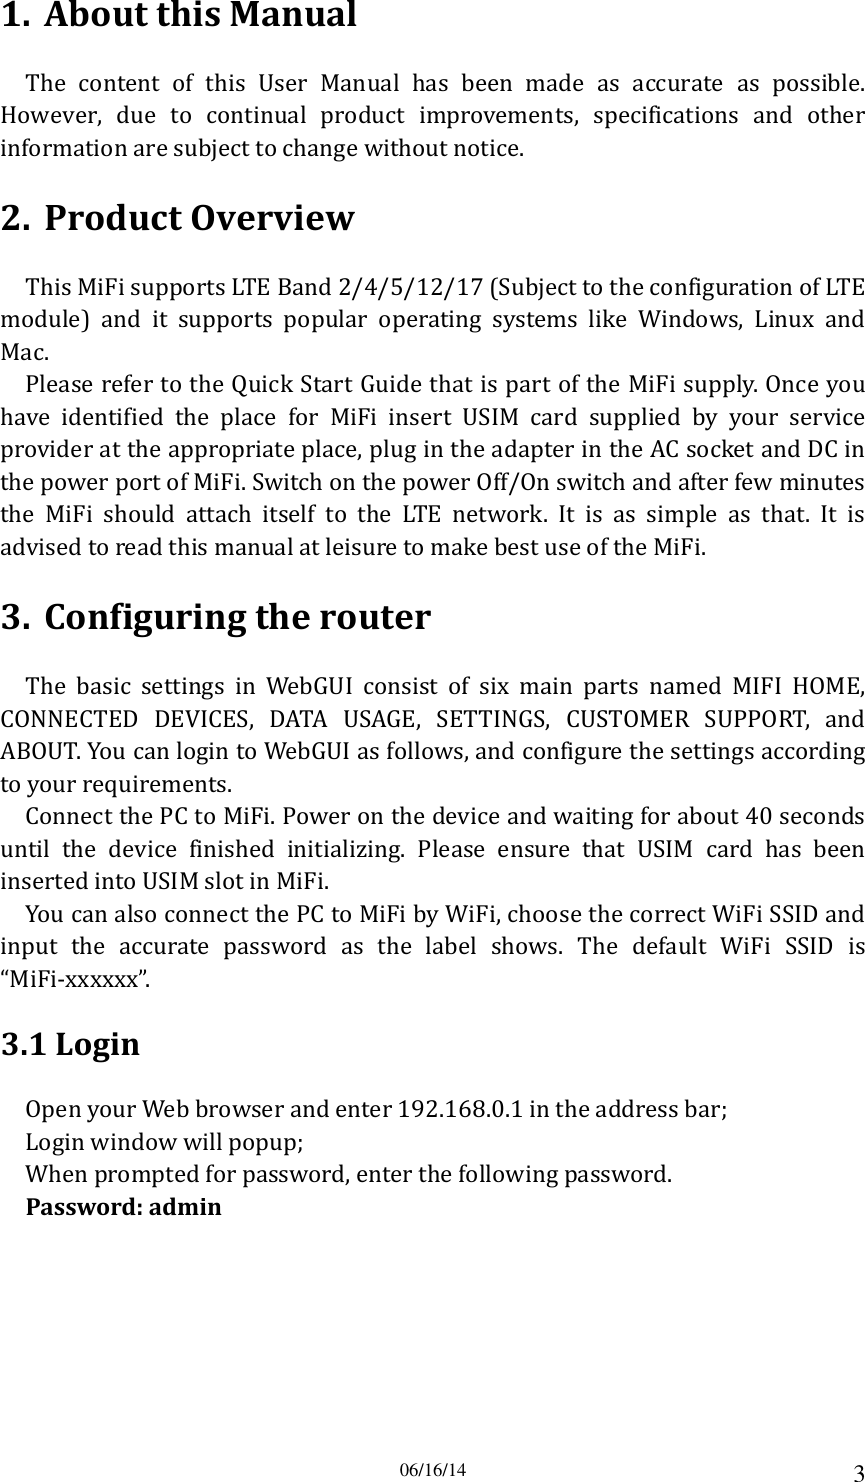 06/16/14 3 1. About this Manual The  content  of  this  User  Manual  has  been  made  as  accurate  as  possible. However,  due  to  continual  product  improvements,  specifications  and  other information are subject to change without notice. 2. Product Overview This MiFi supports LTE Band 2/4/5/12/17 (Subject to the configuration of LTE module)  and  it  supports  popular  operating  systems  like  Windows,  Linux  and Mac.   Please refer to the Quick Start Guide that is part of the MiFi supply. Once you have  identified  the  place  for  MiFi  insert  USIM  card  supplied  by  your  service provider at the appropriate place, plug in the adapter in the AC socket and DC in the power port of MiFi. Switch on the power Off/On switch and after few minutes the  MiFi  should  attach  itself  to  the  LTE  network.  It  is  as  simple  as  that.  It  is advised to read this manual at leisure to make best use of the MiFi. 3. Configuring the router The  basic  settings  in  WebGUI  consist  of  six  main  parts  named  MIFI  HOME, CONNECTED  DEVICES,  DATA  USAGE,  SETTINGS,  CUSTOMER  SUPPORT,  and ABOUT. You can login to WebGUI as follows, and configure the settings according to your requirements. Connect the PC to MiFi. Power on the device and waiting for about 40 seconds until  the  device  finished  initializing.  Please  ensure  that  USIM  card  has  been inserted into USIM slot in MiFi. You can also connect the PC to MiFi by WiFi, choose the correct WiFi SSID and input  the  accurate  password  as  the  label  shows.  The  default  WiFi  SSID  is “MiFi-xxxxxx”. 3.1 Login Open your Web browser and enter 192.168.0.1 in the address bar; Login window will popup; When prompted for password, enter the following password. Password: admin 